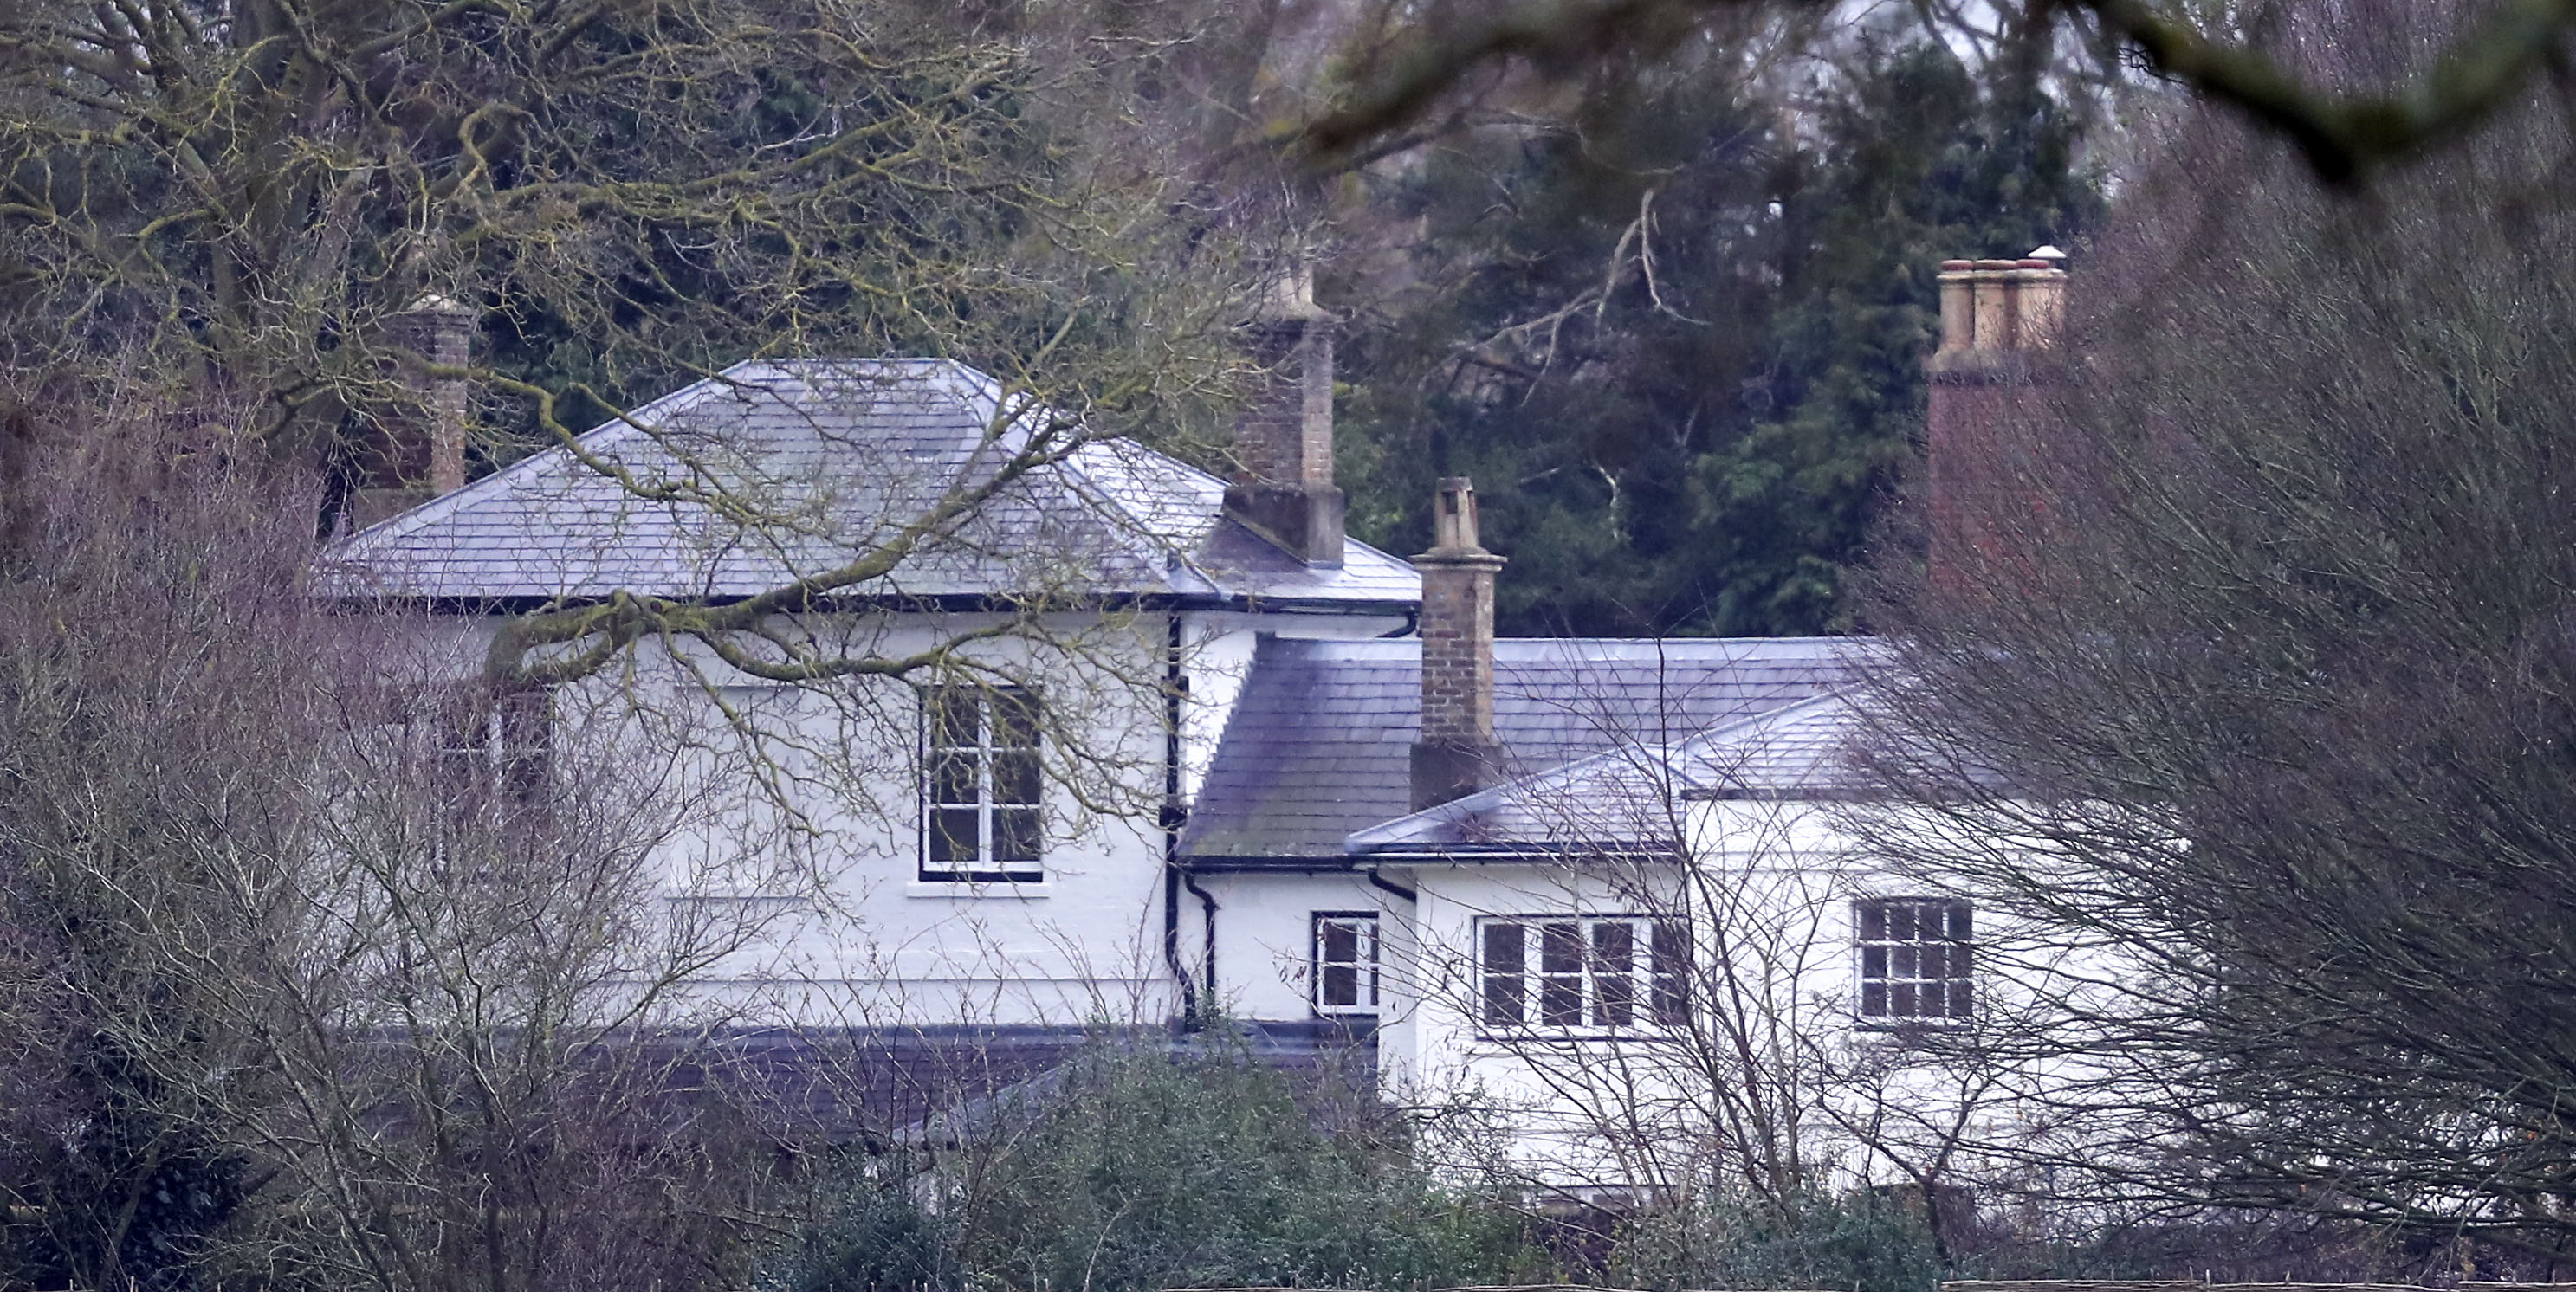 A view of Frogmore Cottage in Windsor, England on January 14, 2020 | Source: Getty Images